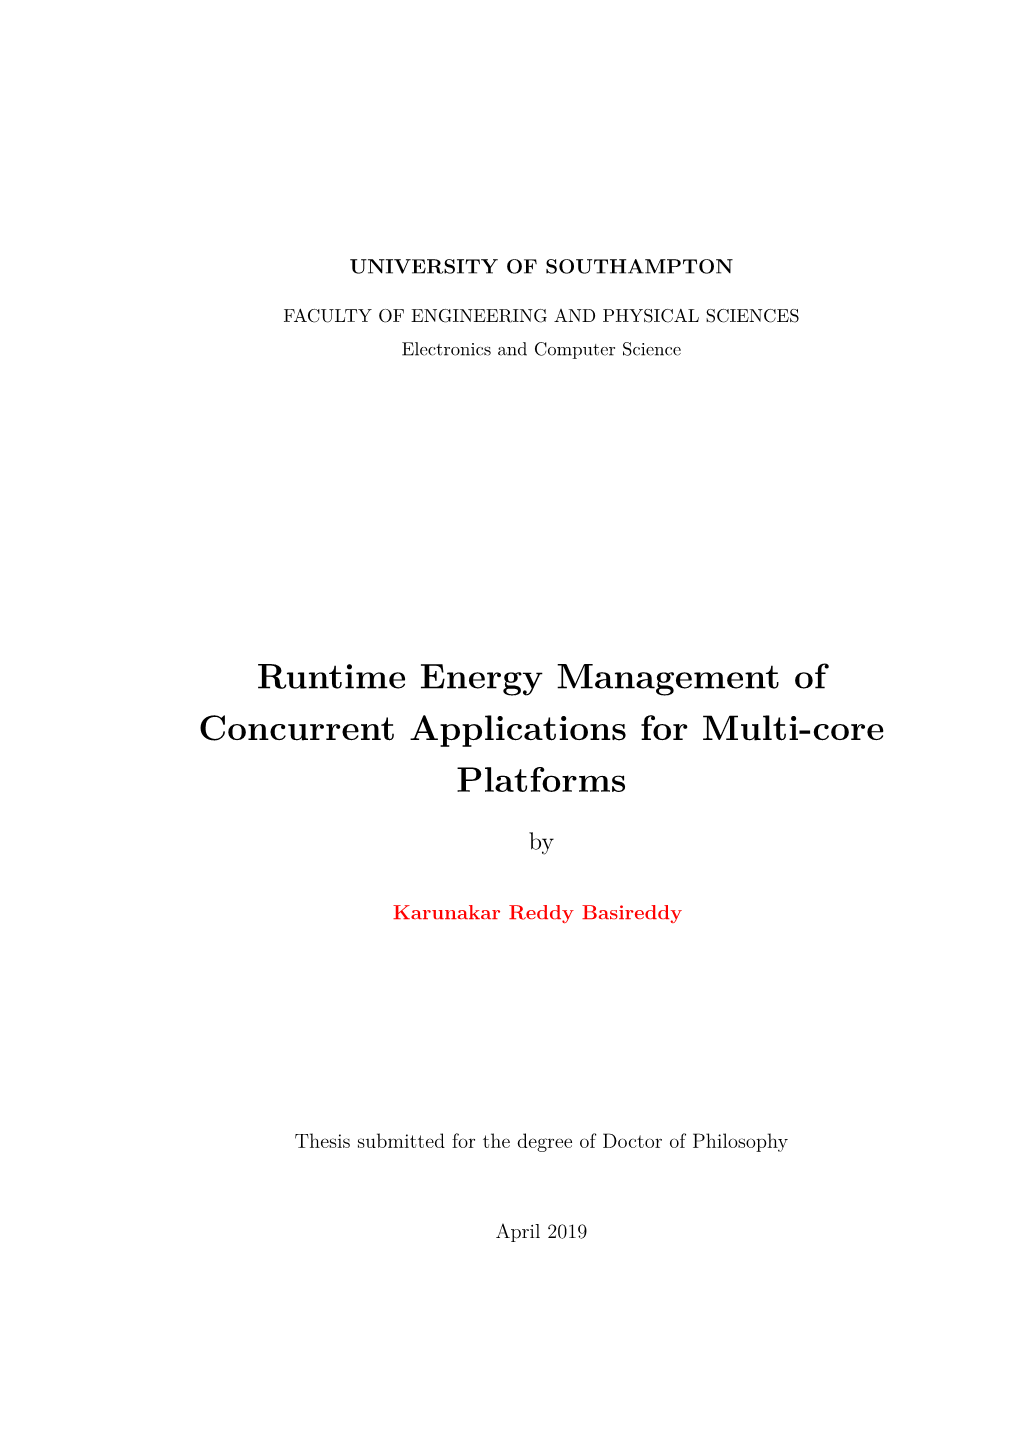 Runtime Energy Management of Concurrent Applications for Multi-Core Platforms